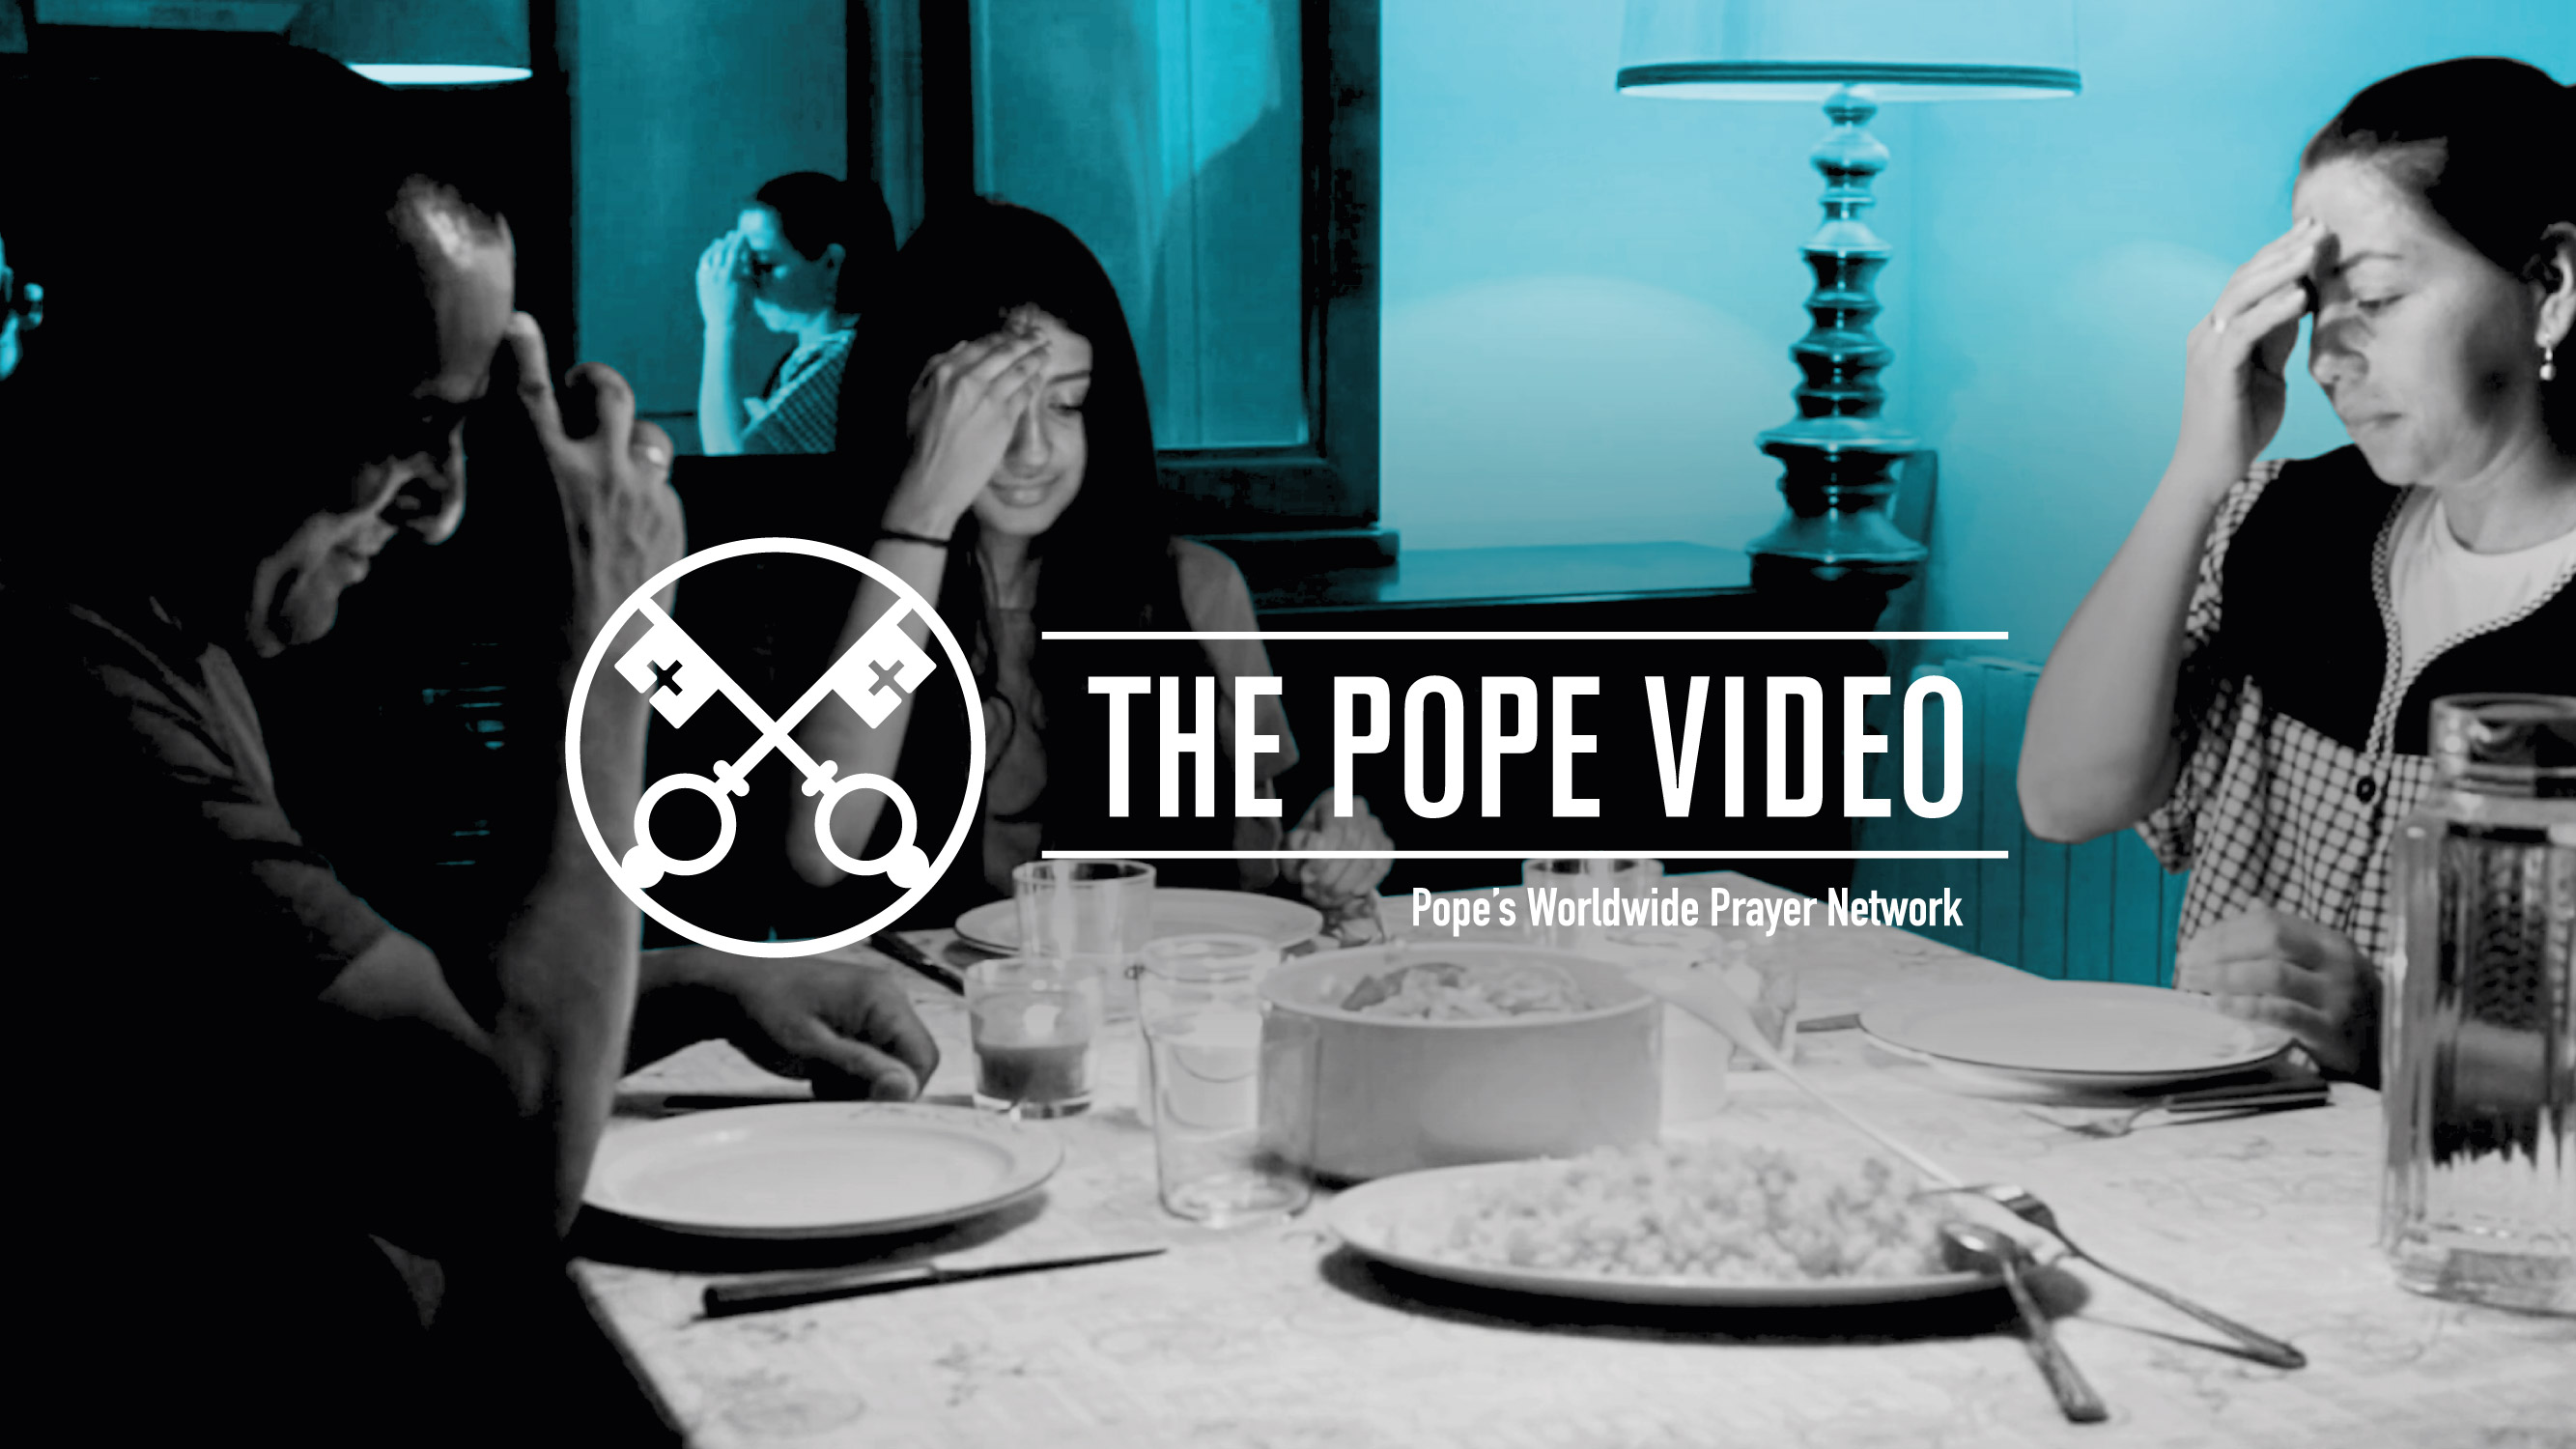 The Pope Video August 2019 (Official Image)